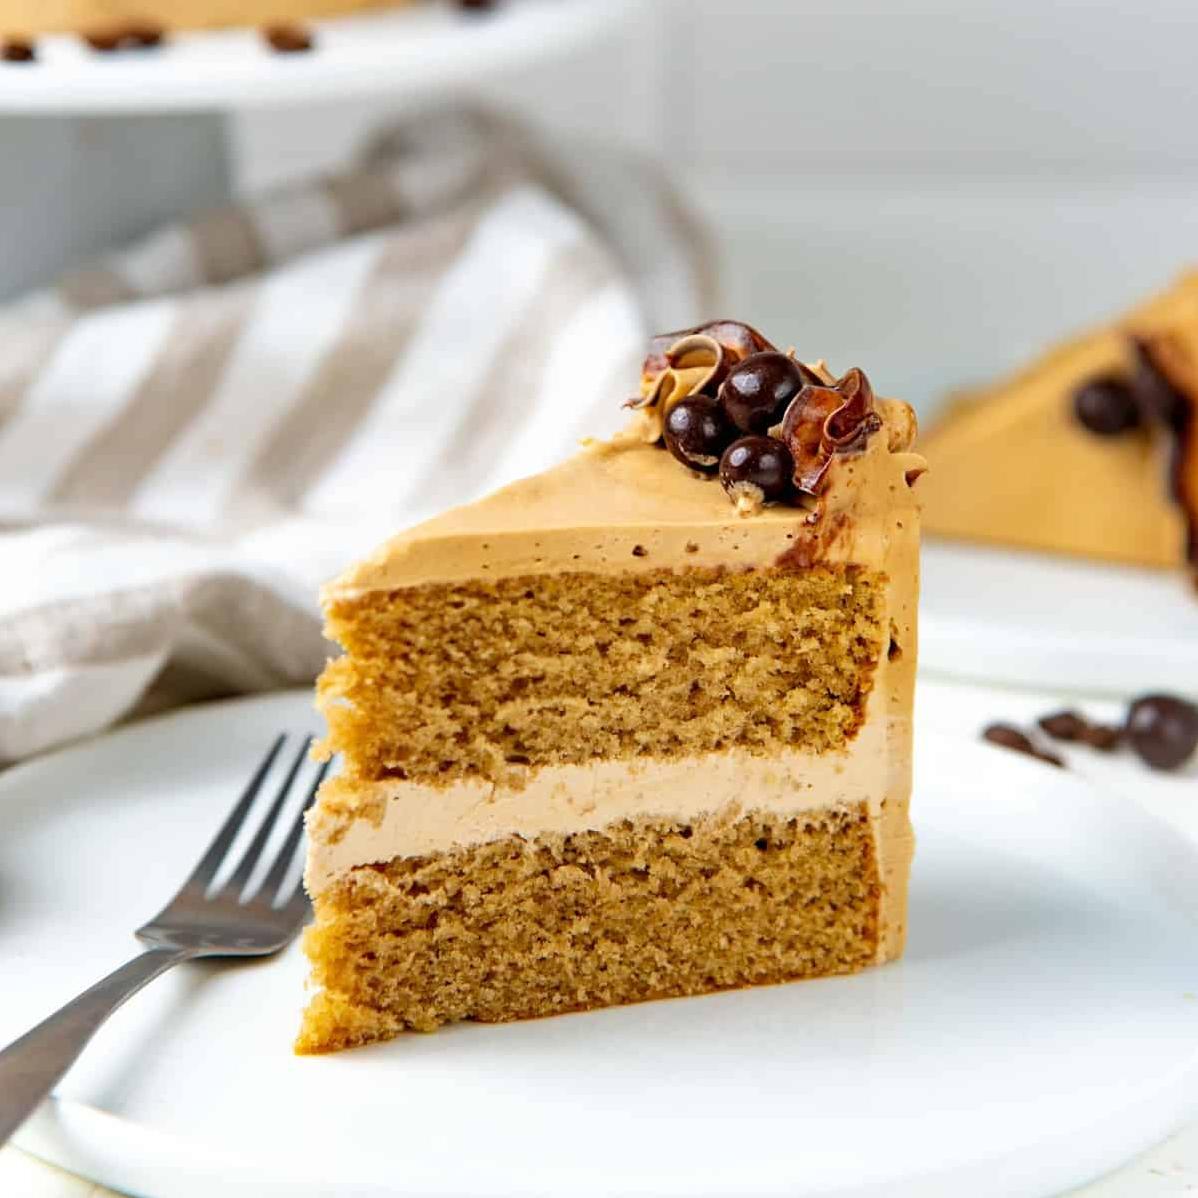  Can't decide between coffee and cake? This recipe solves the problem.